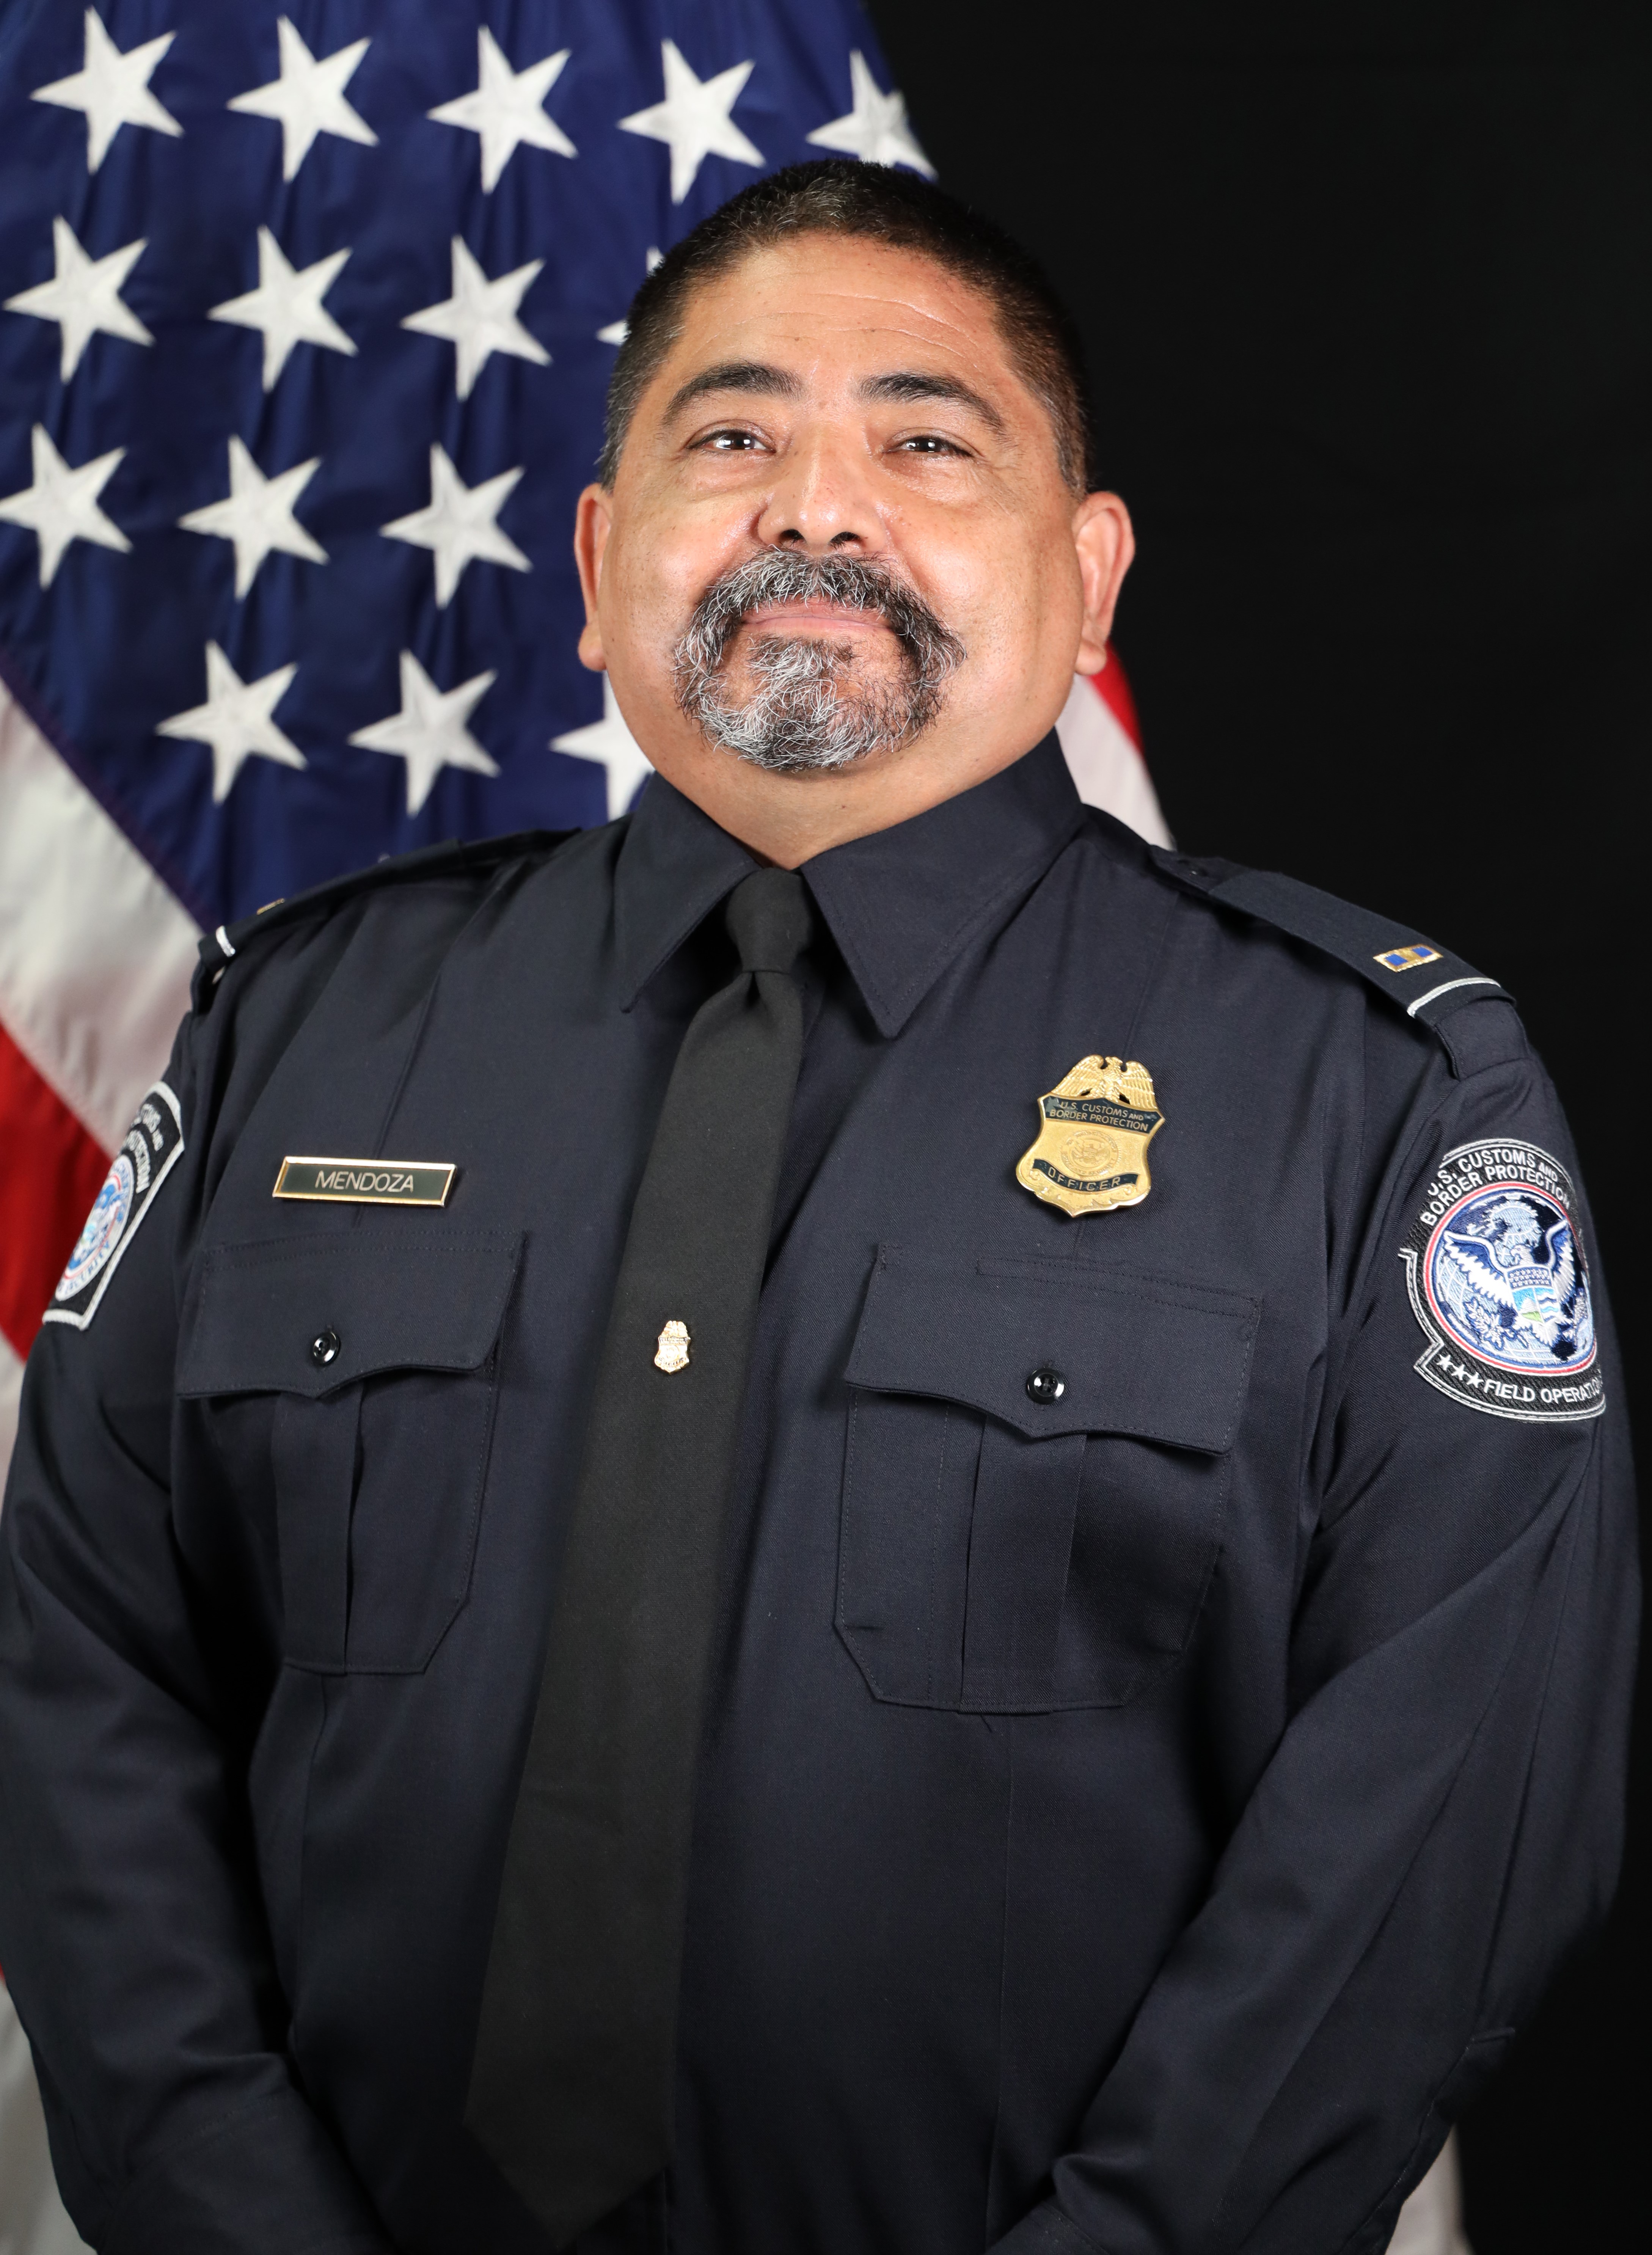 Officer Carlos Mendoza | United States Department of Homeland Security - Customs and Border Protection - Office of Field Operations, U.S. Government